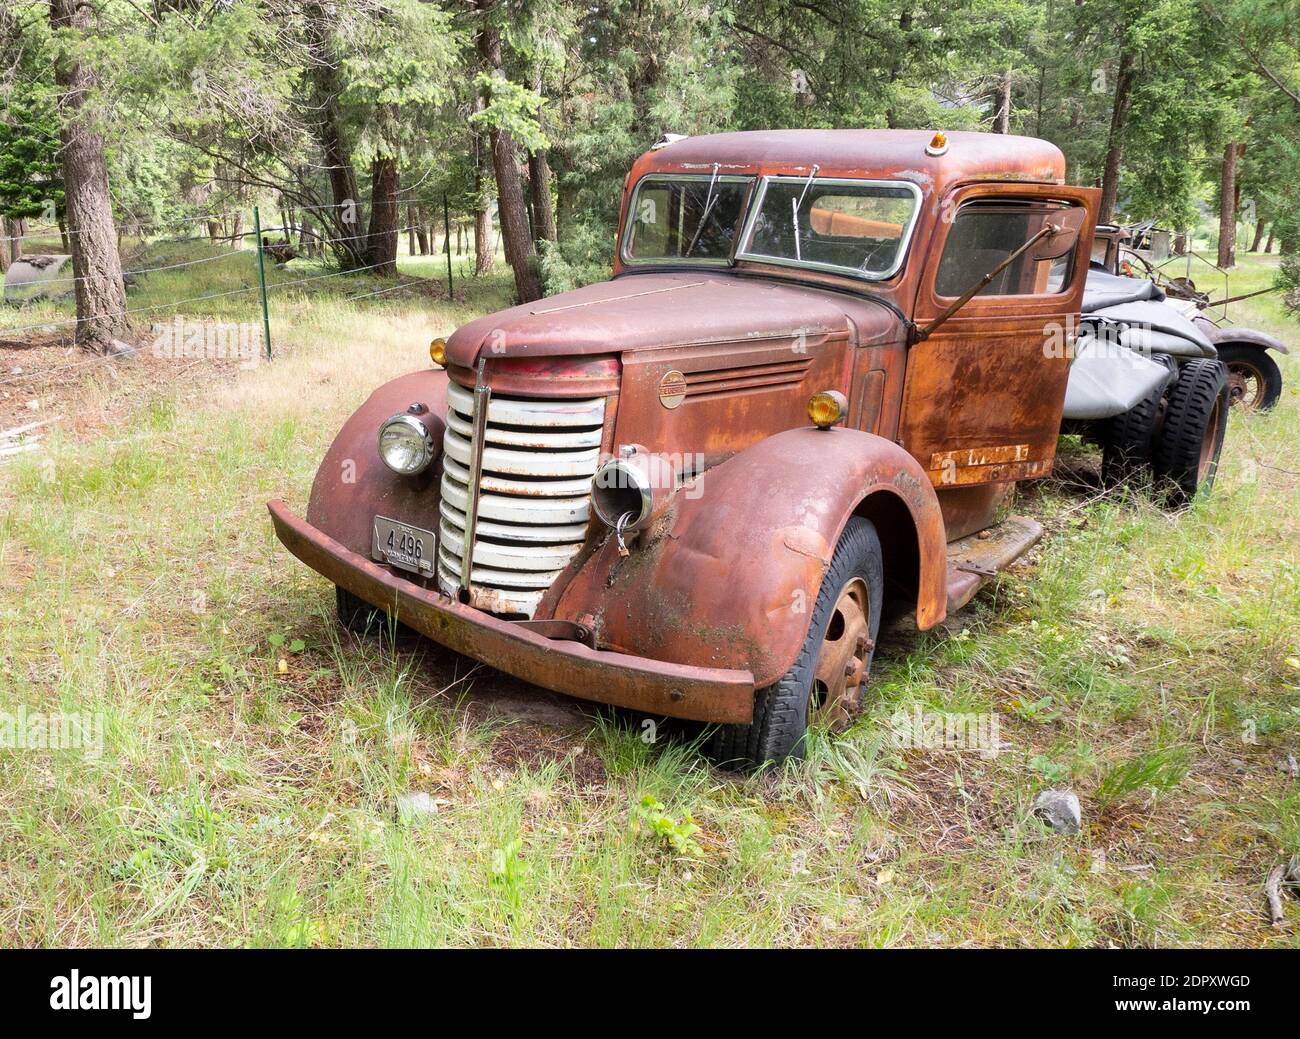 A rusted out 1939 Federal farm truck on a farm in Valley of the Moon, Rock Creek, Montana. Stock Photo